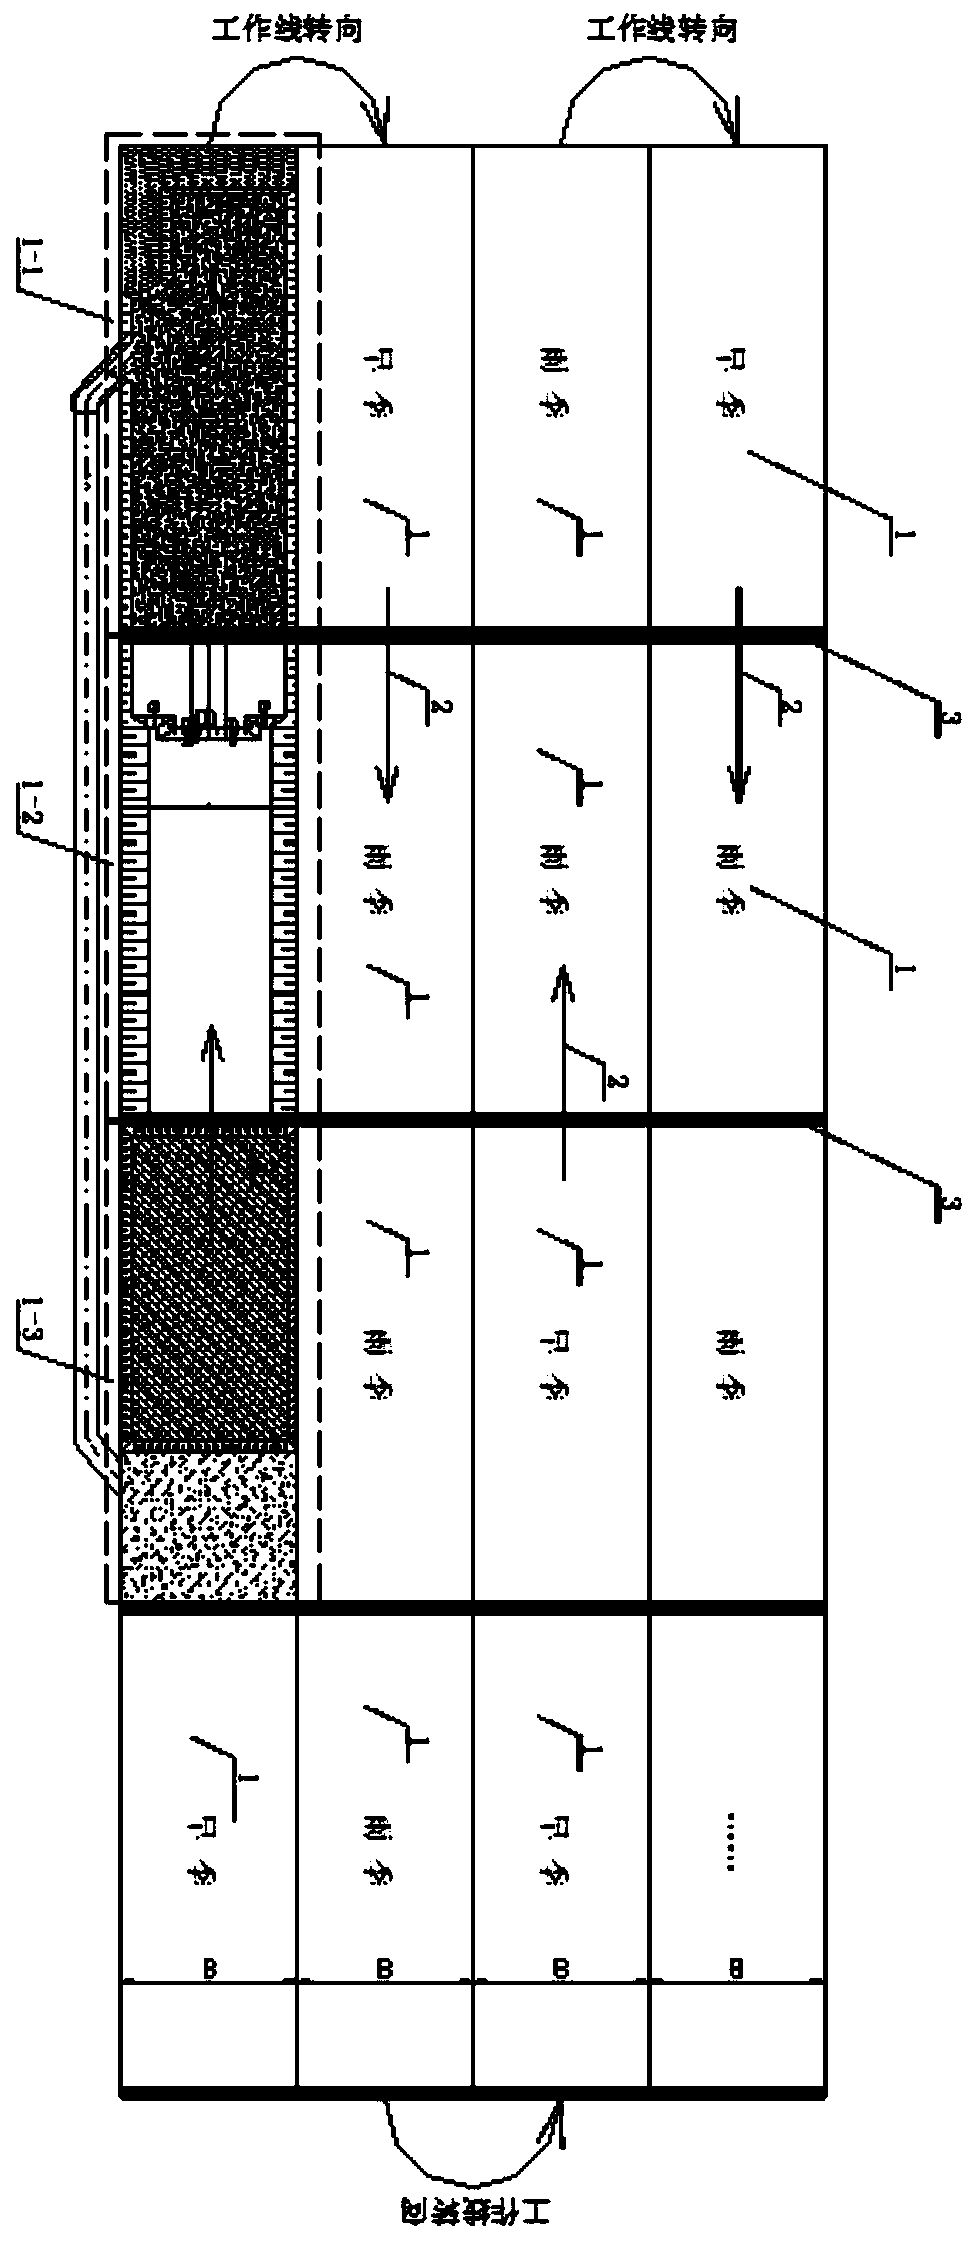 A grid-type mining method in an open-pit mine